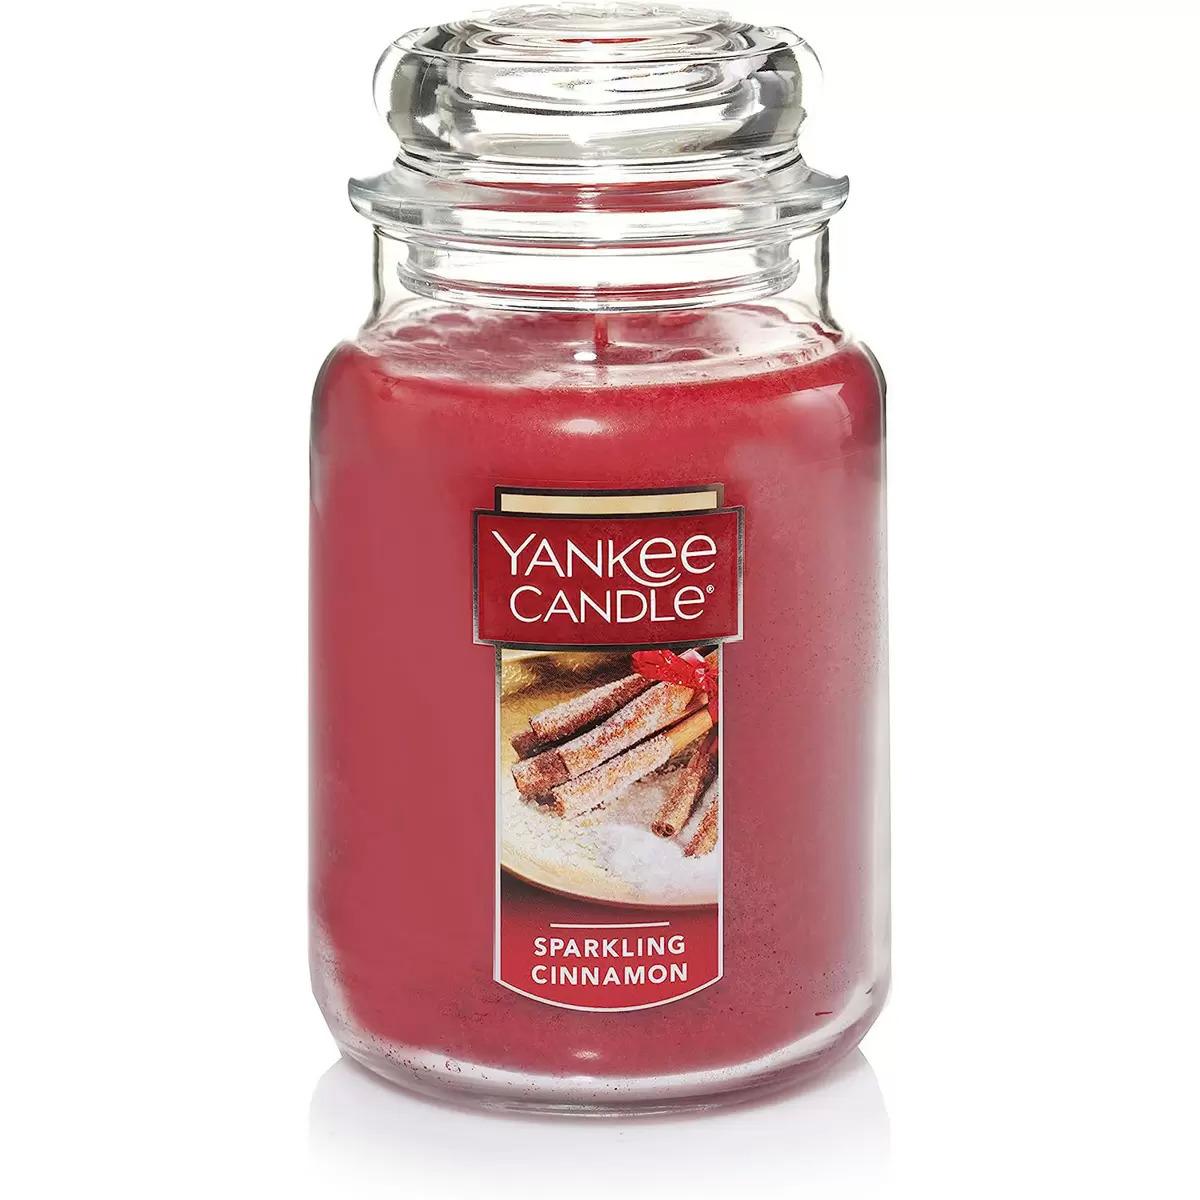 Yankee Candle Large Jar Candle Sparkling Cinnamon 22oz for $11.82